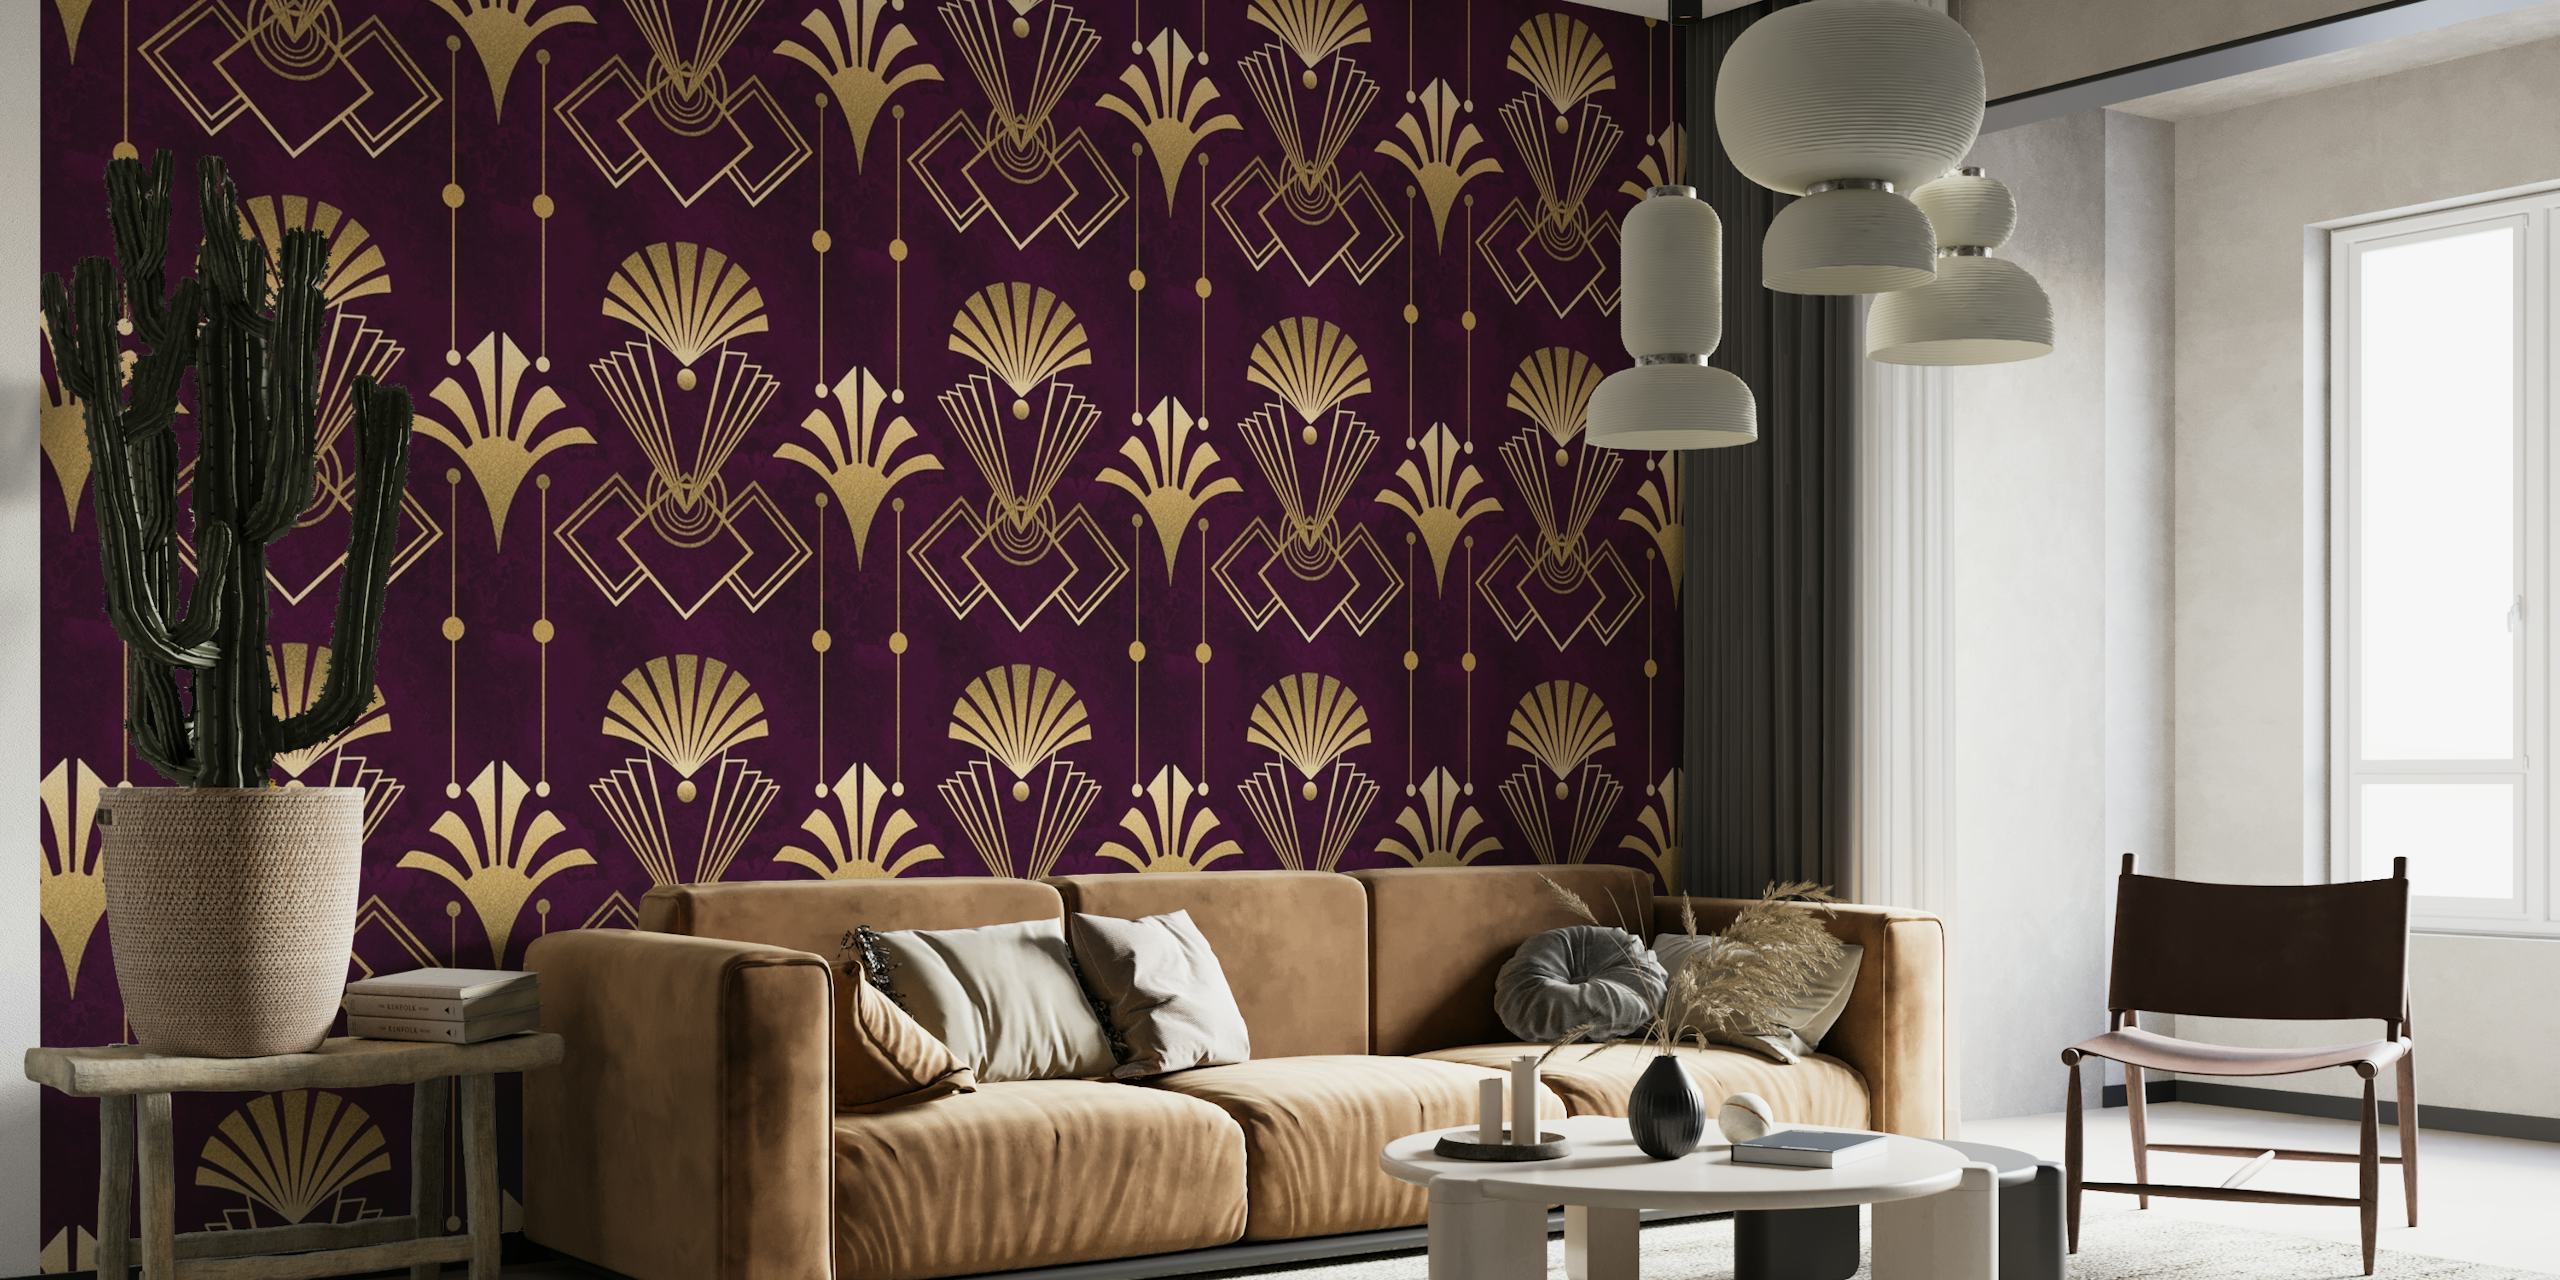 Exquisite Burgundy and Gold Art Deco Wallpaper